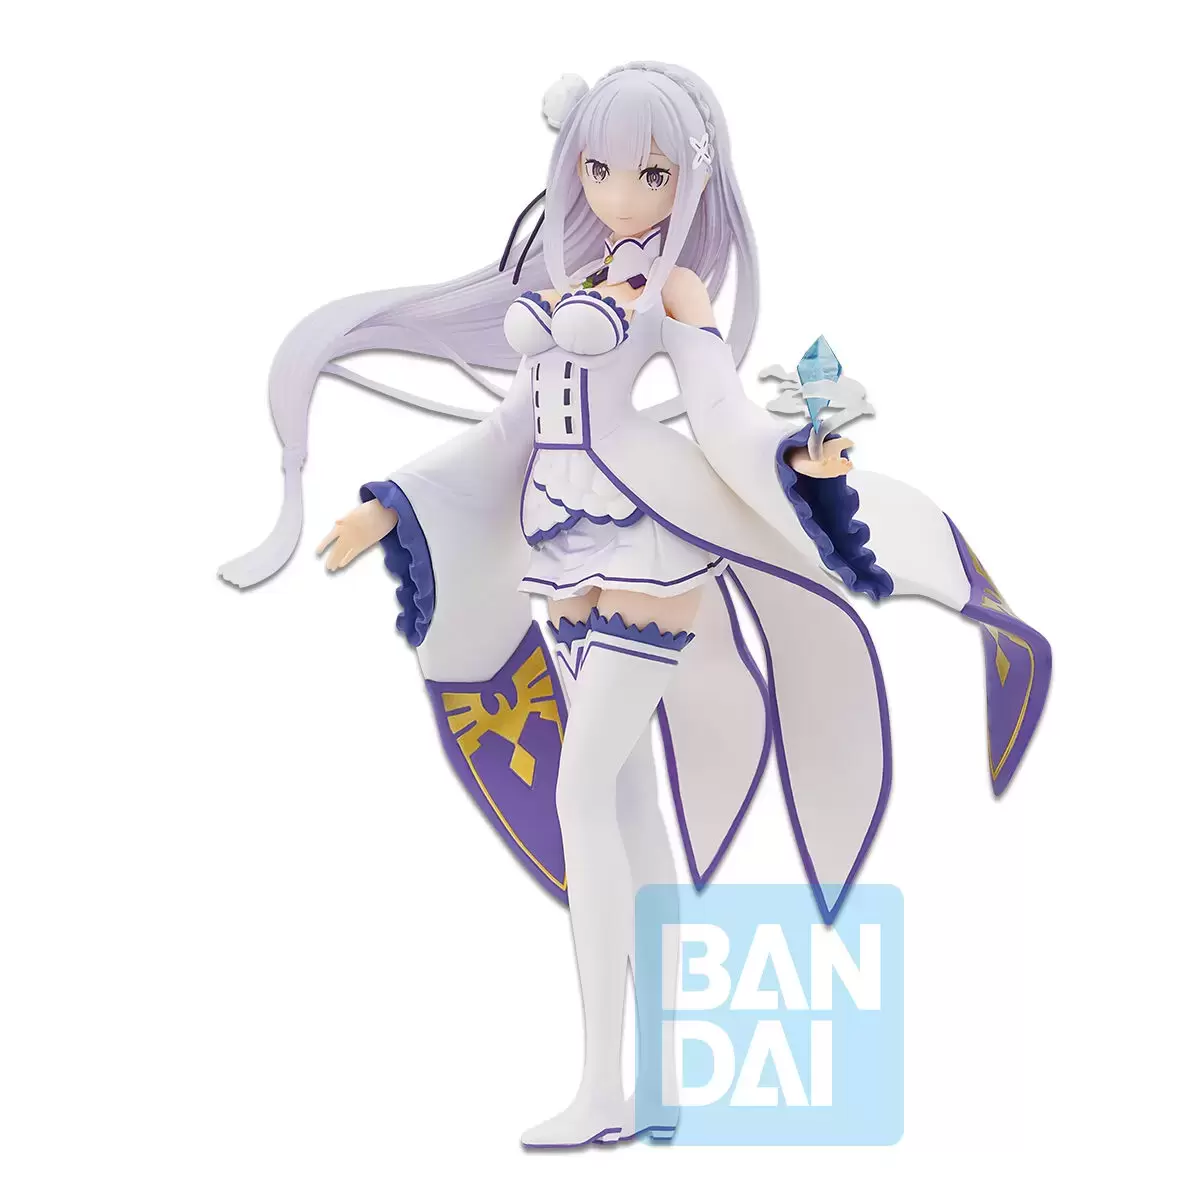 Bandai / Tamashii Nations - Emilia (story Is To Be Continued)